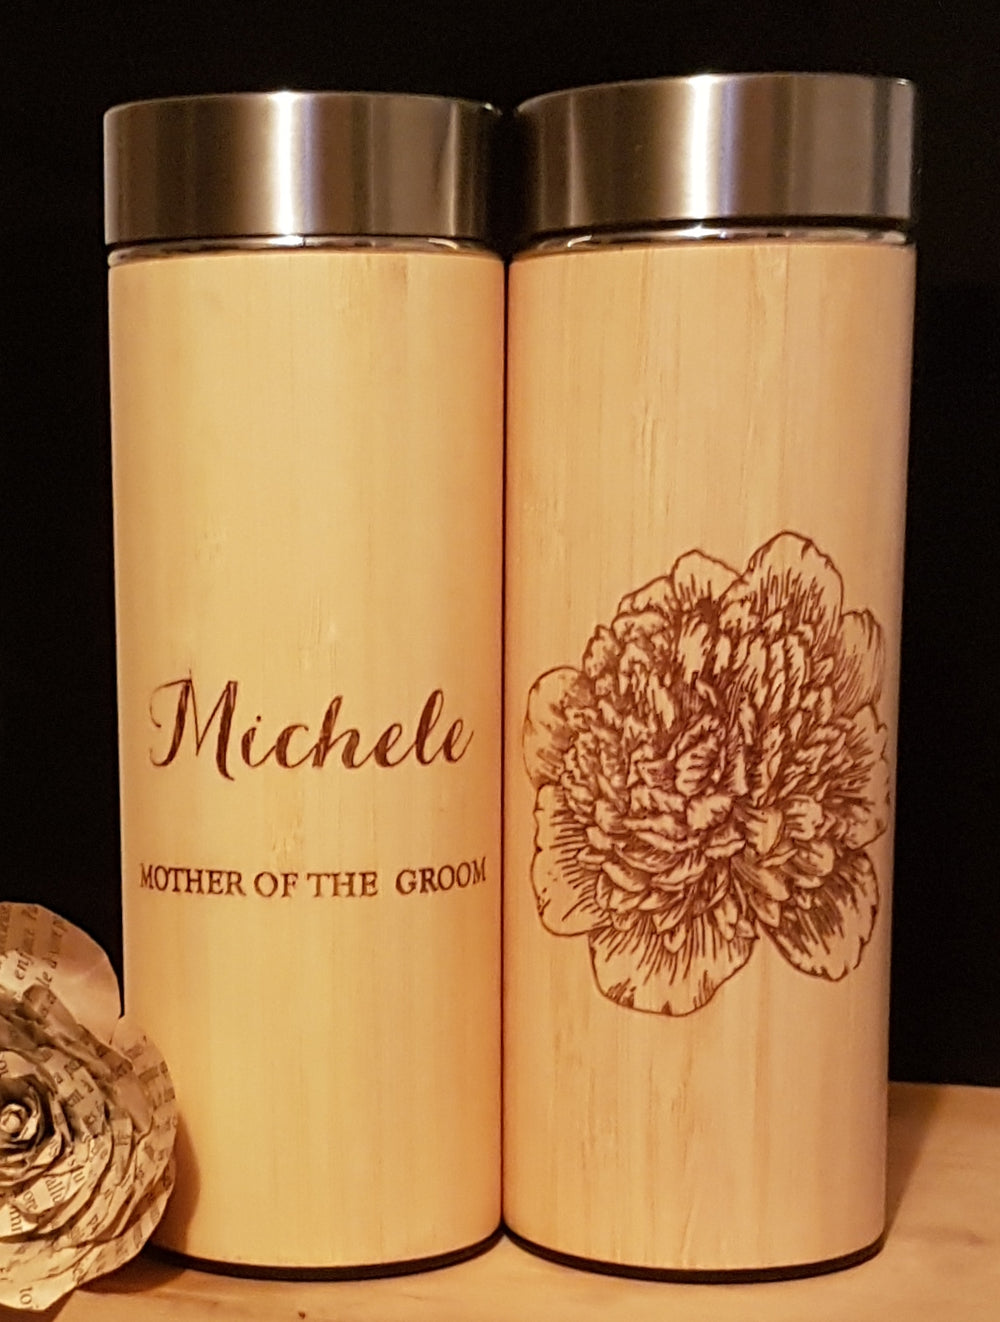 Both Sides Engraved IMAGE or TEXT on Wood Thermos - litha-creations-france